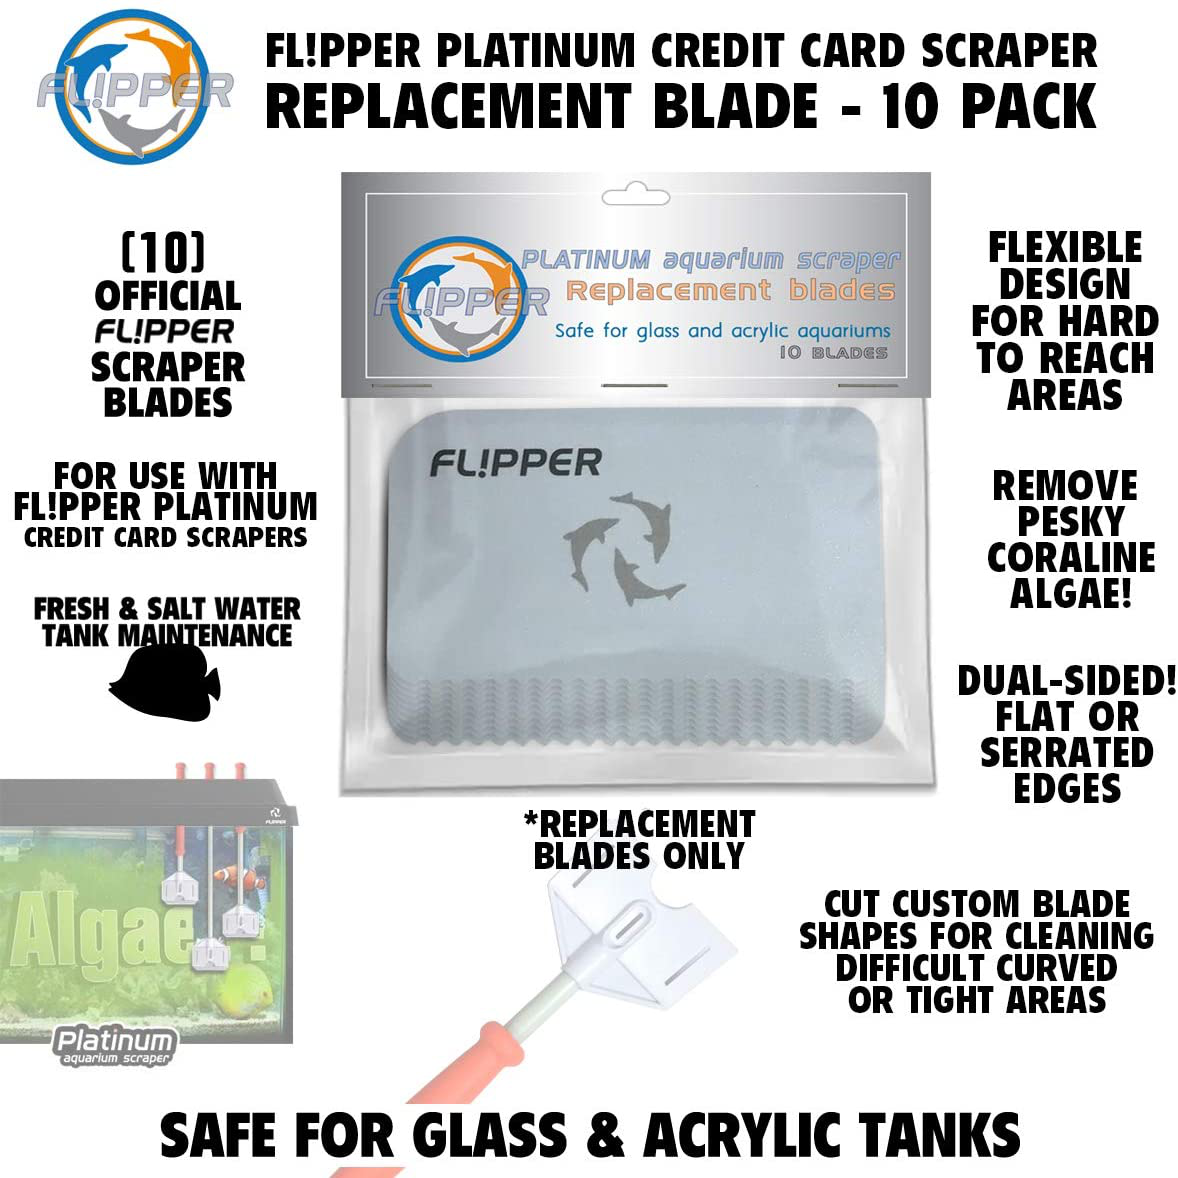 FL!PPER Flipper Platinum Aquarium Scraper Replacement Blades for Fish Tank Cleaning Kits– Replacement Blades for Glass Tanks & Acrylic Tanks – Aquarium Cleaner Blades with Serrated Edge, 10 Pack Animals & Pet Supplies > Pet Supplies > Fish Supplies > Aquarium Cleaning Supplies FL!PPER   